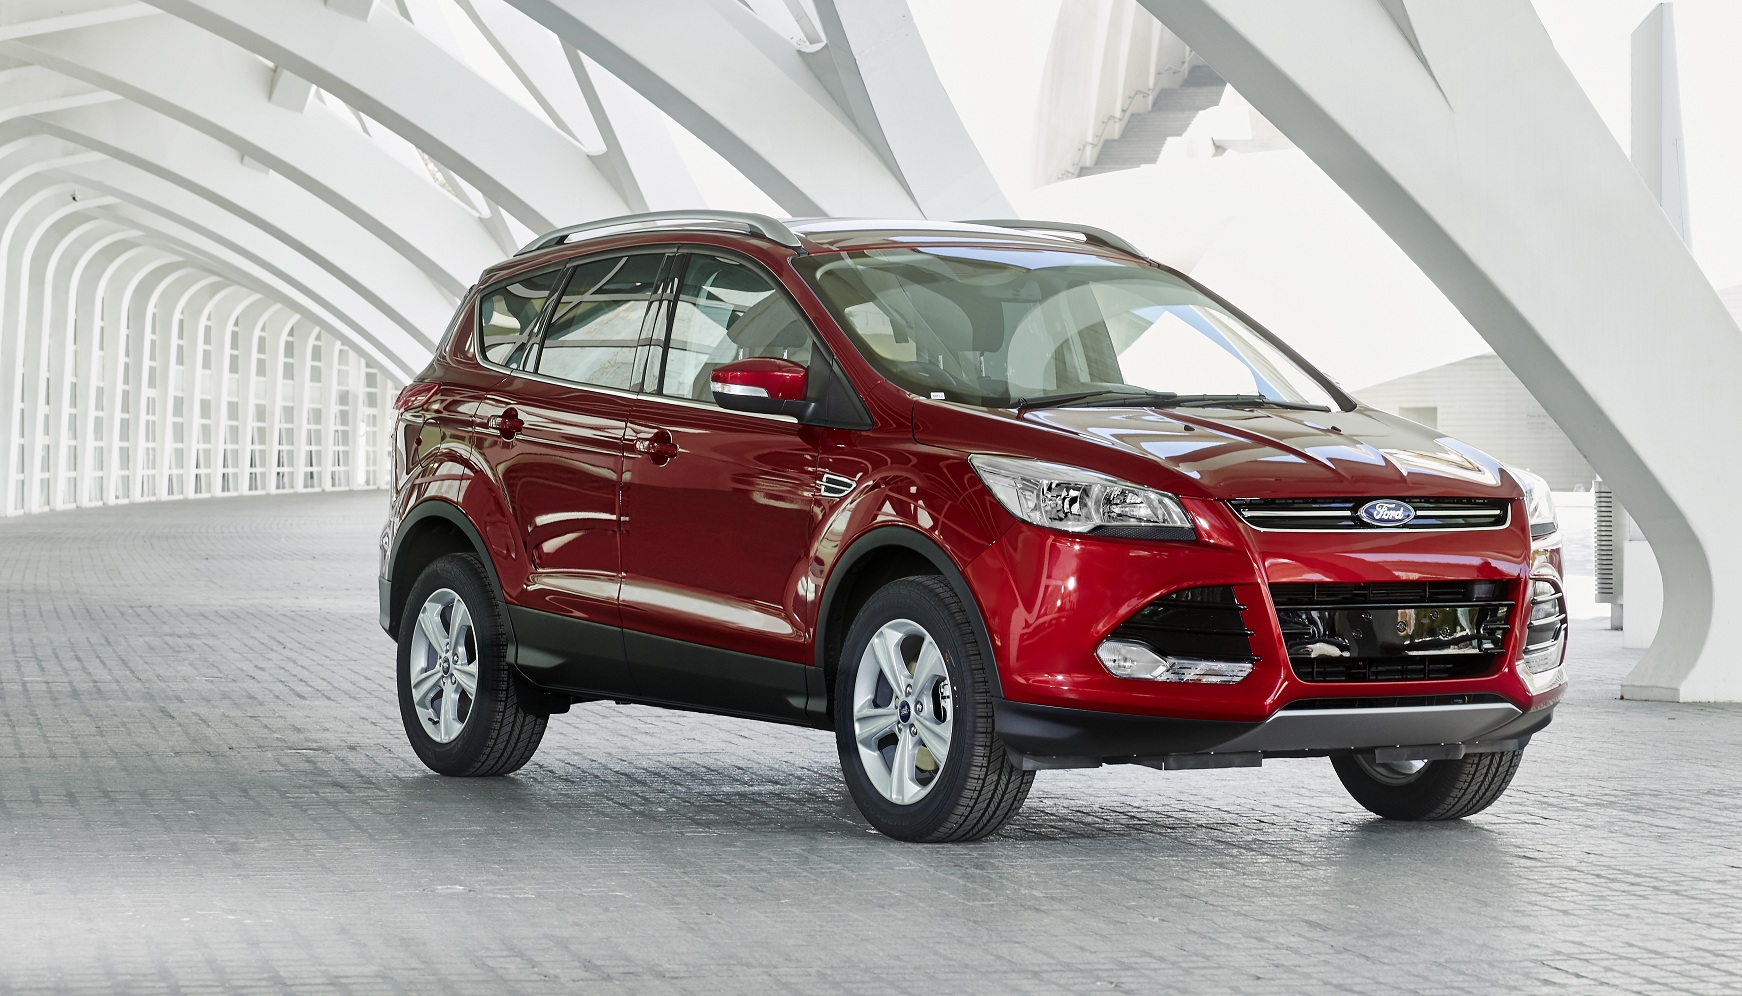 Ford Delivers Most Powerful Diesel Kuga Ever Alongside Lower CO2